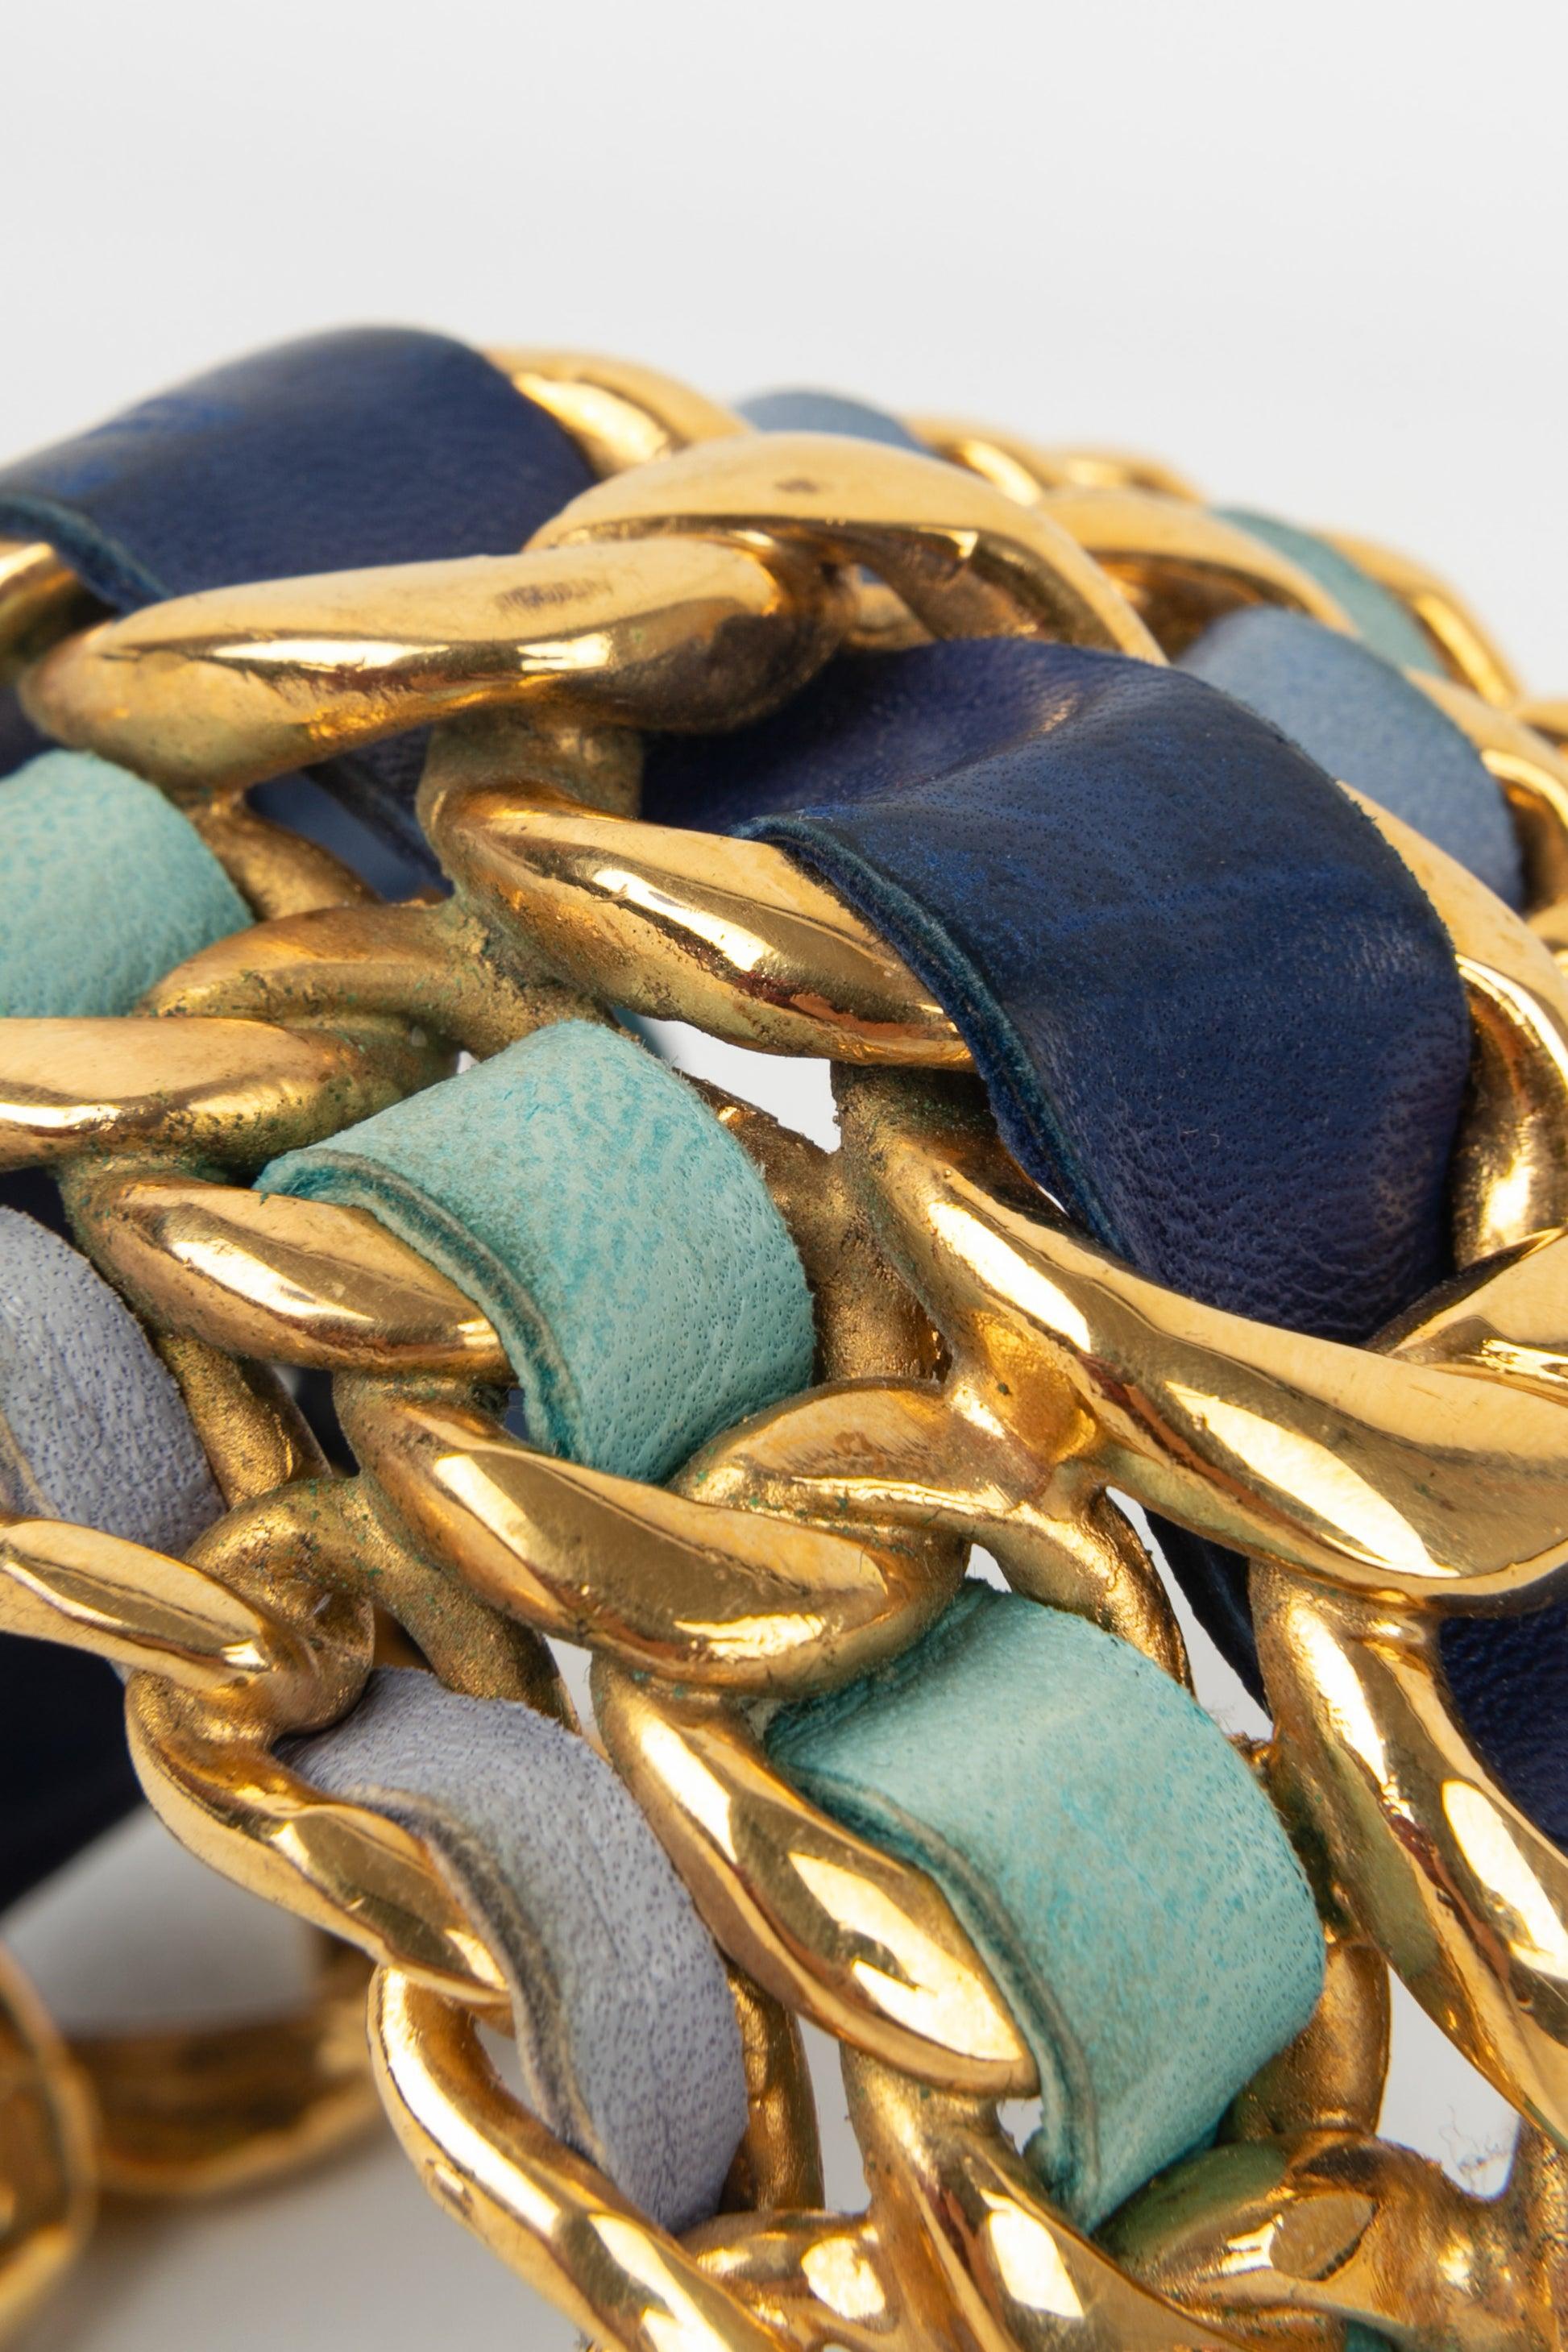 Chanel Cuff Bracelet in Golden Metal Interlaced with Blue Tone Leather, 1991 For Sale 2